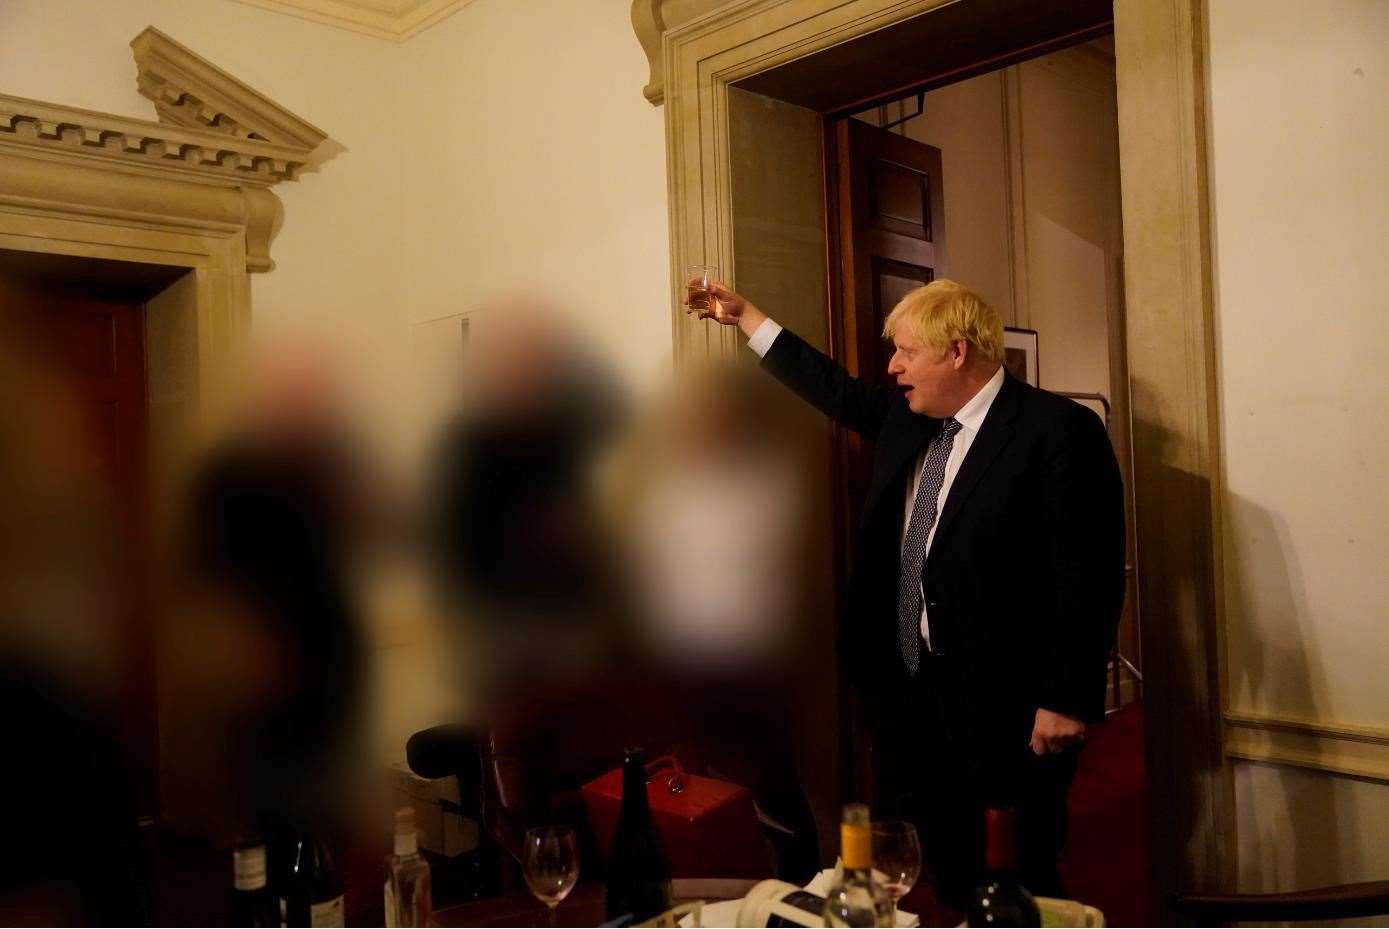 Prime Minister Boris Johnson pictured at a party in No.10. He was fined for his presence at one of the social gatherings.